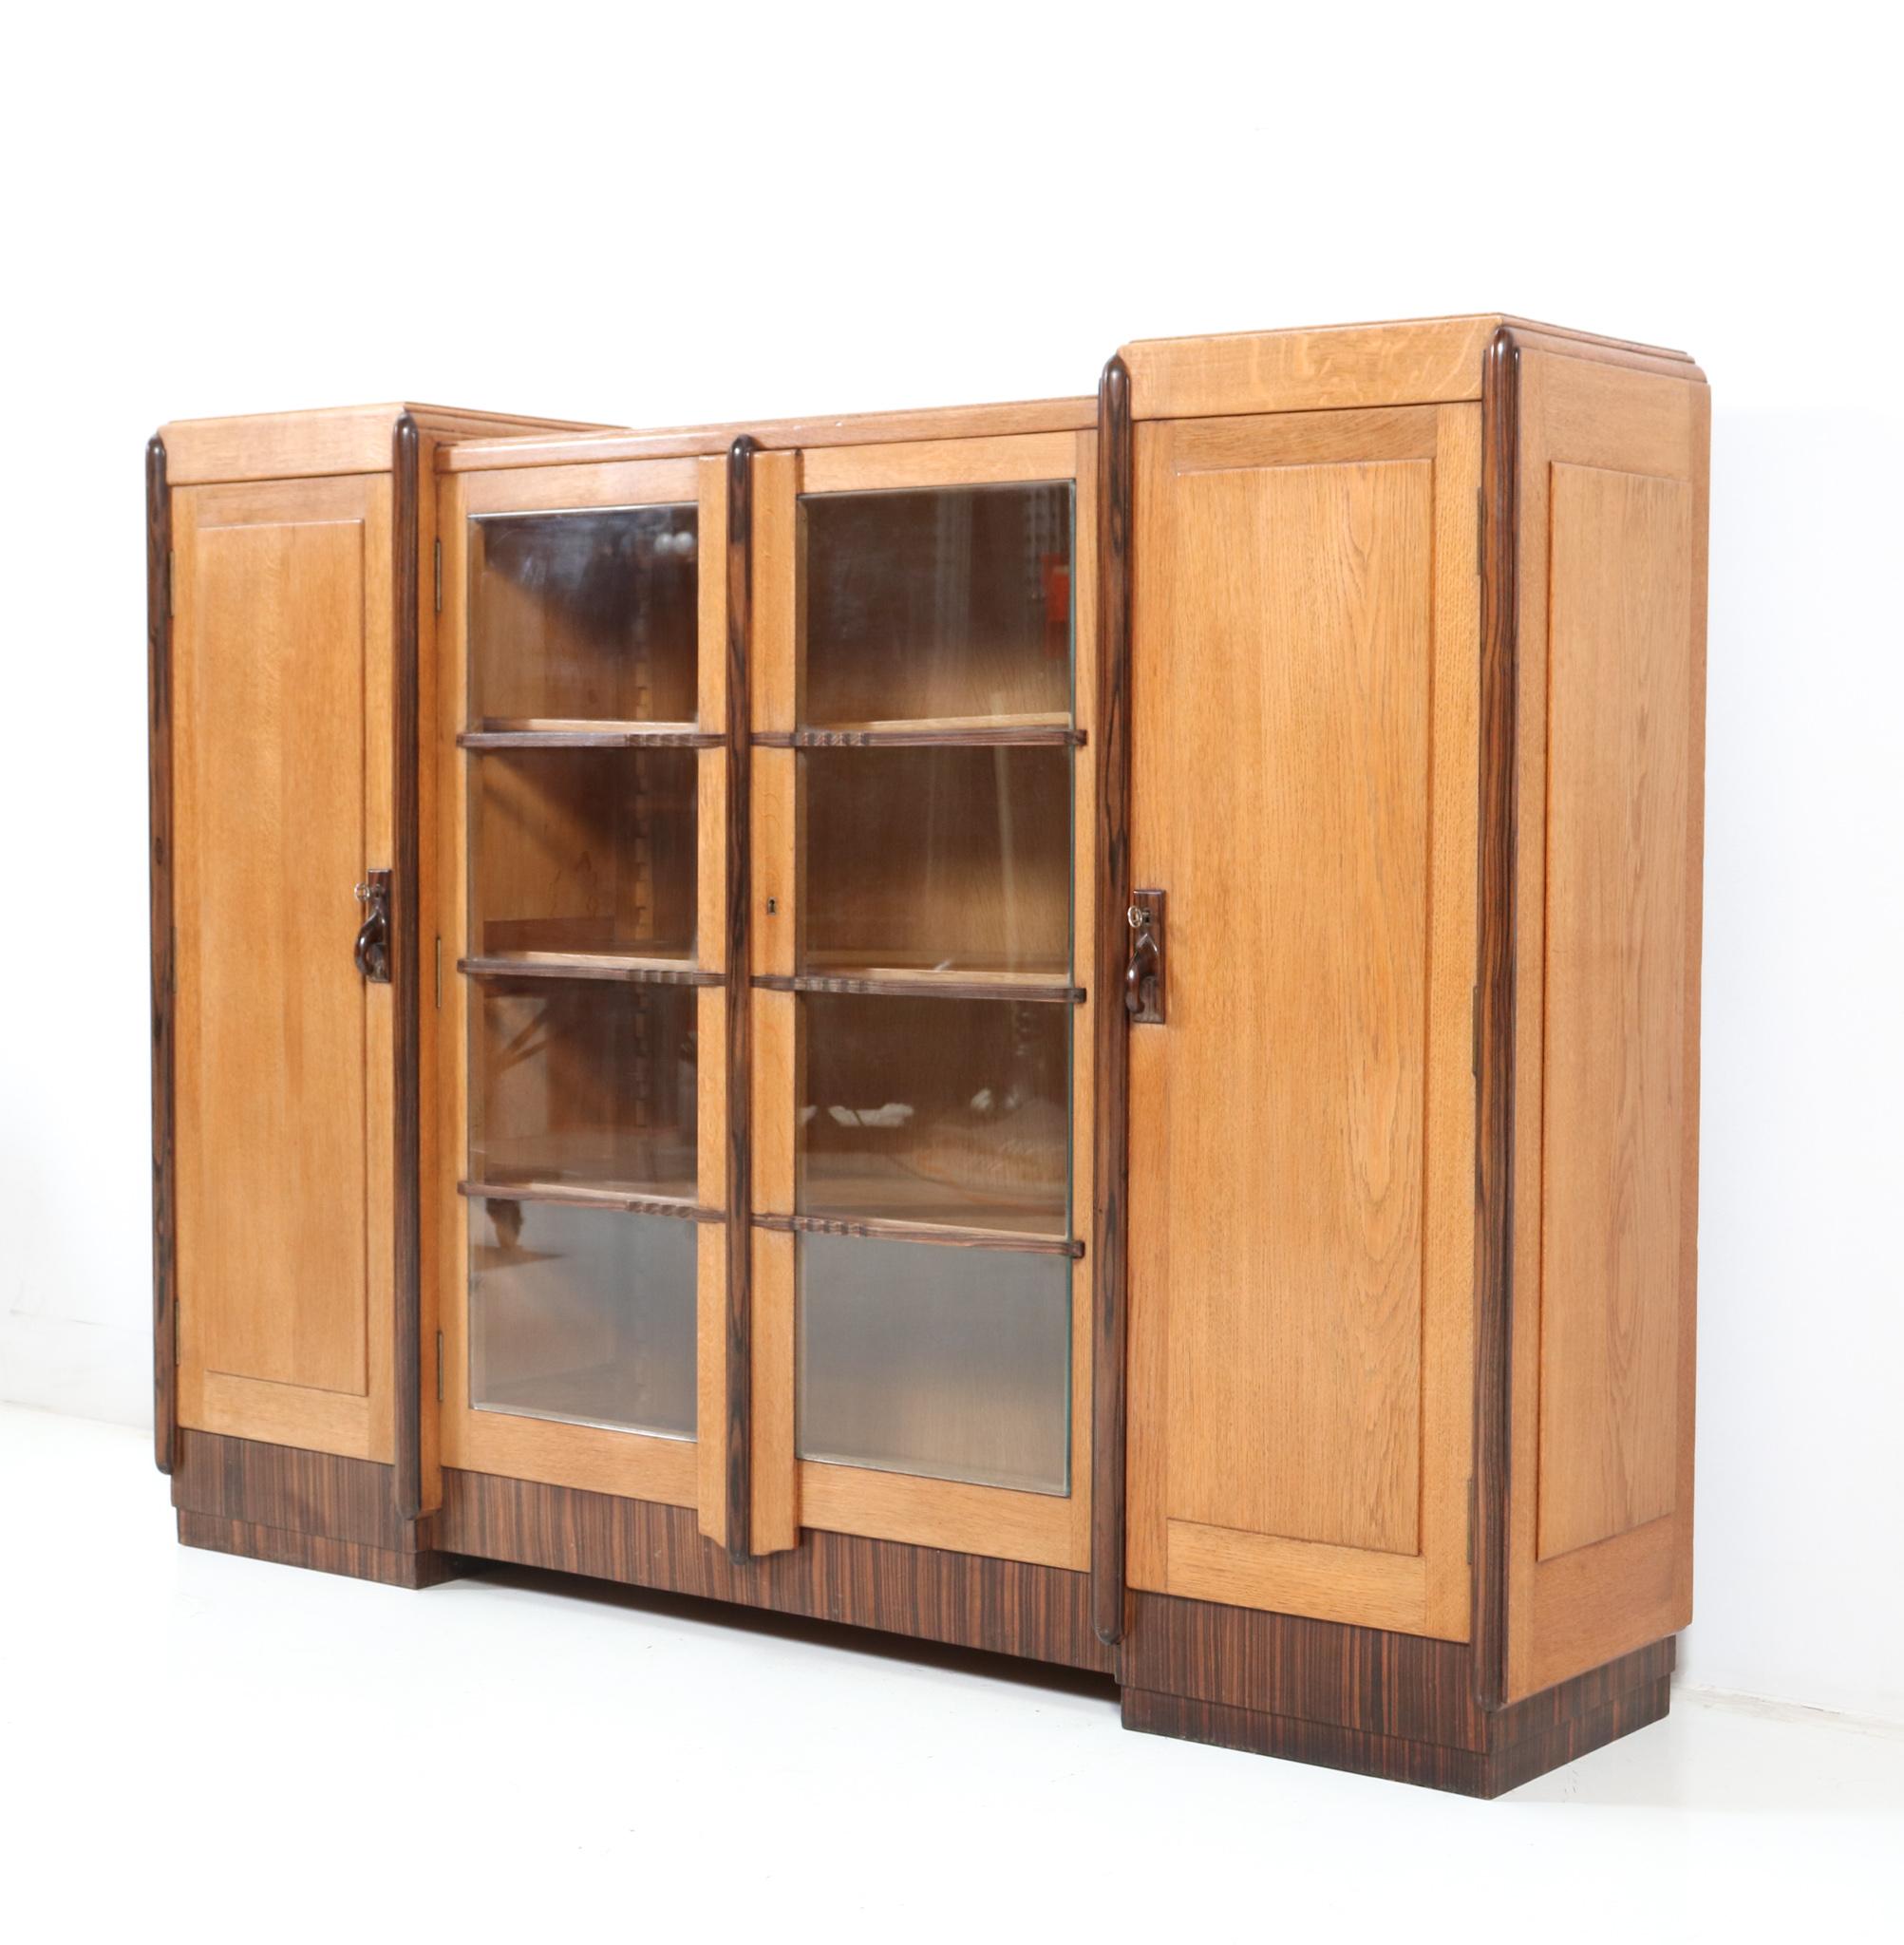 Magnificent and rare Art Deco Amsterdamse School bookcase.
Striking Dutch design from the 1920s.
Solid oak and original oak veneer with solid macassar ebony and original macassar ebony veneer.
Nine original solid oak shelves, adjustable in